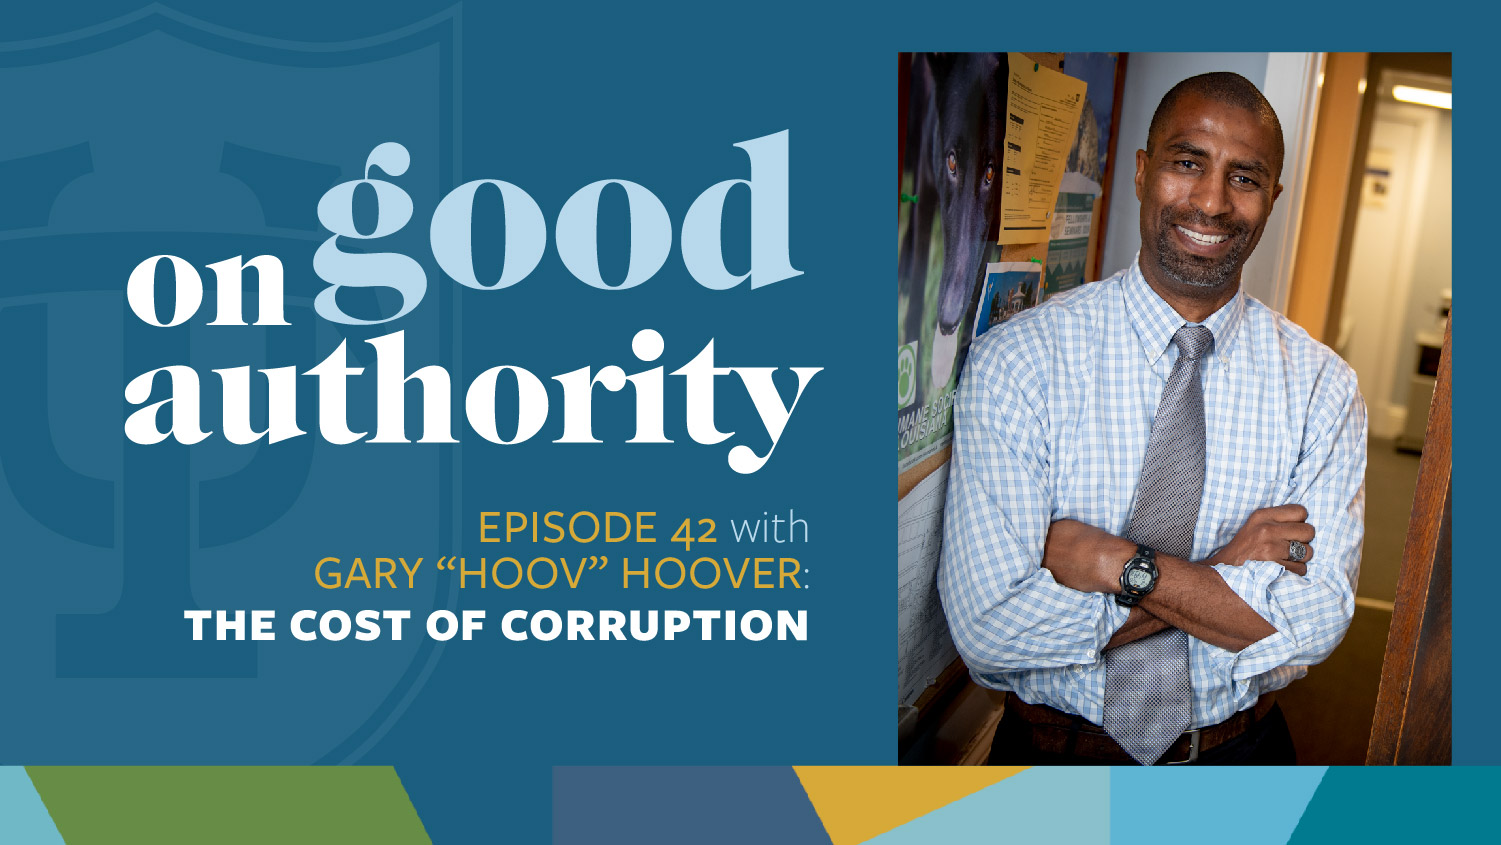 On Good Authority Episode 42 – Photo of Gary Hoover